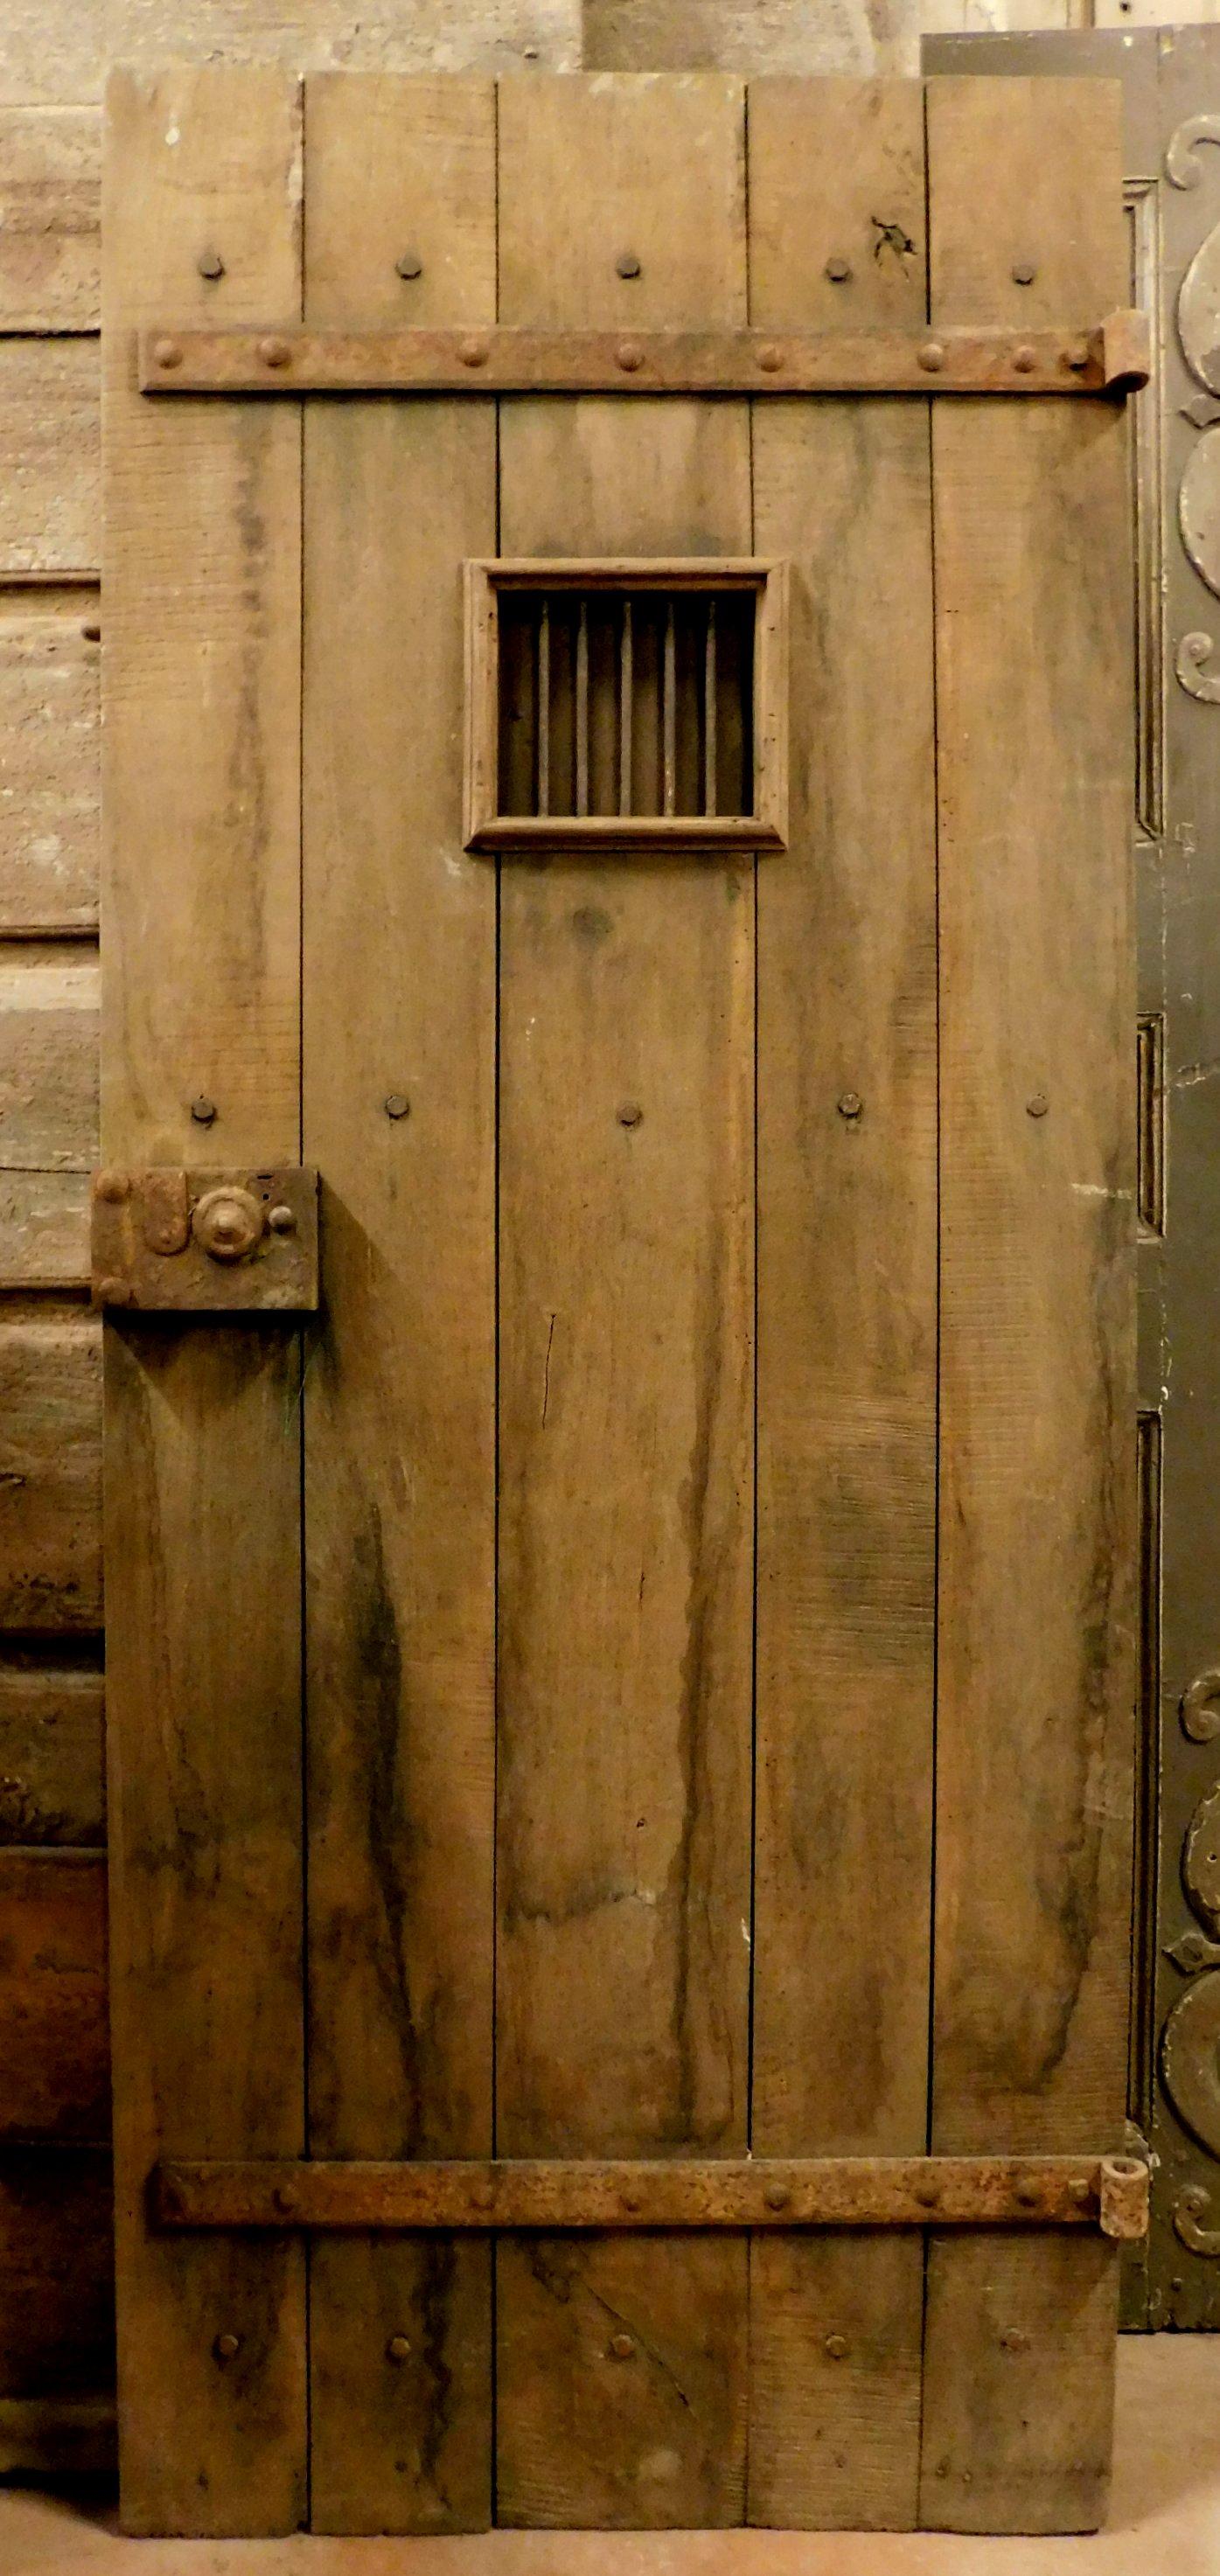 Antique rustic prison door, studded boards with original window and locking irons, solid chestnut wood door, 19th century, built for an old noble rustic in Italy.
Ideal as a door for cellars, wine cellars, historic commercial premises or for rustic